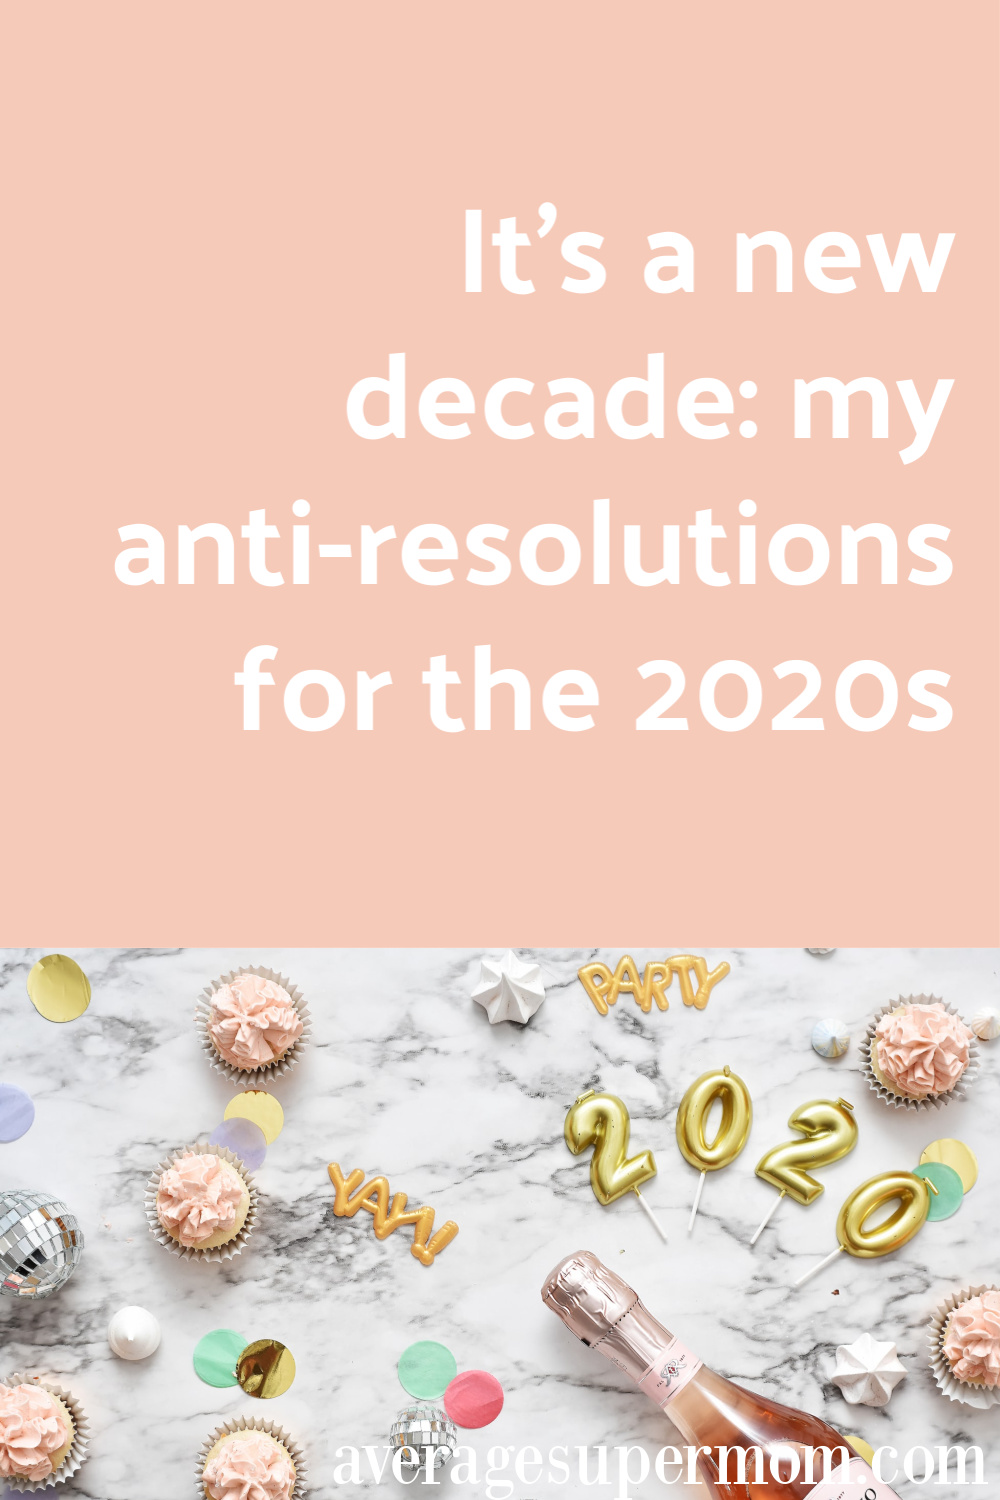 It's a new decade: my anti-resolutions for the 2020s